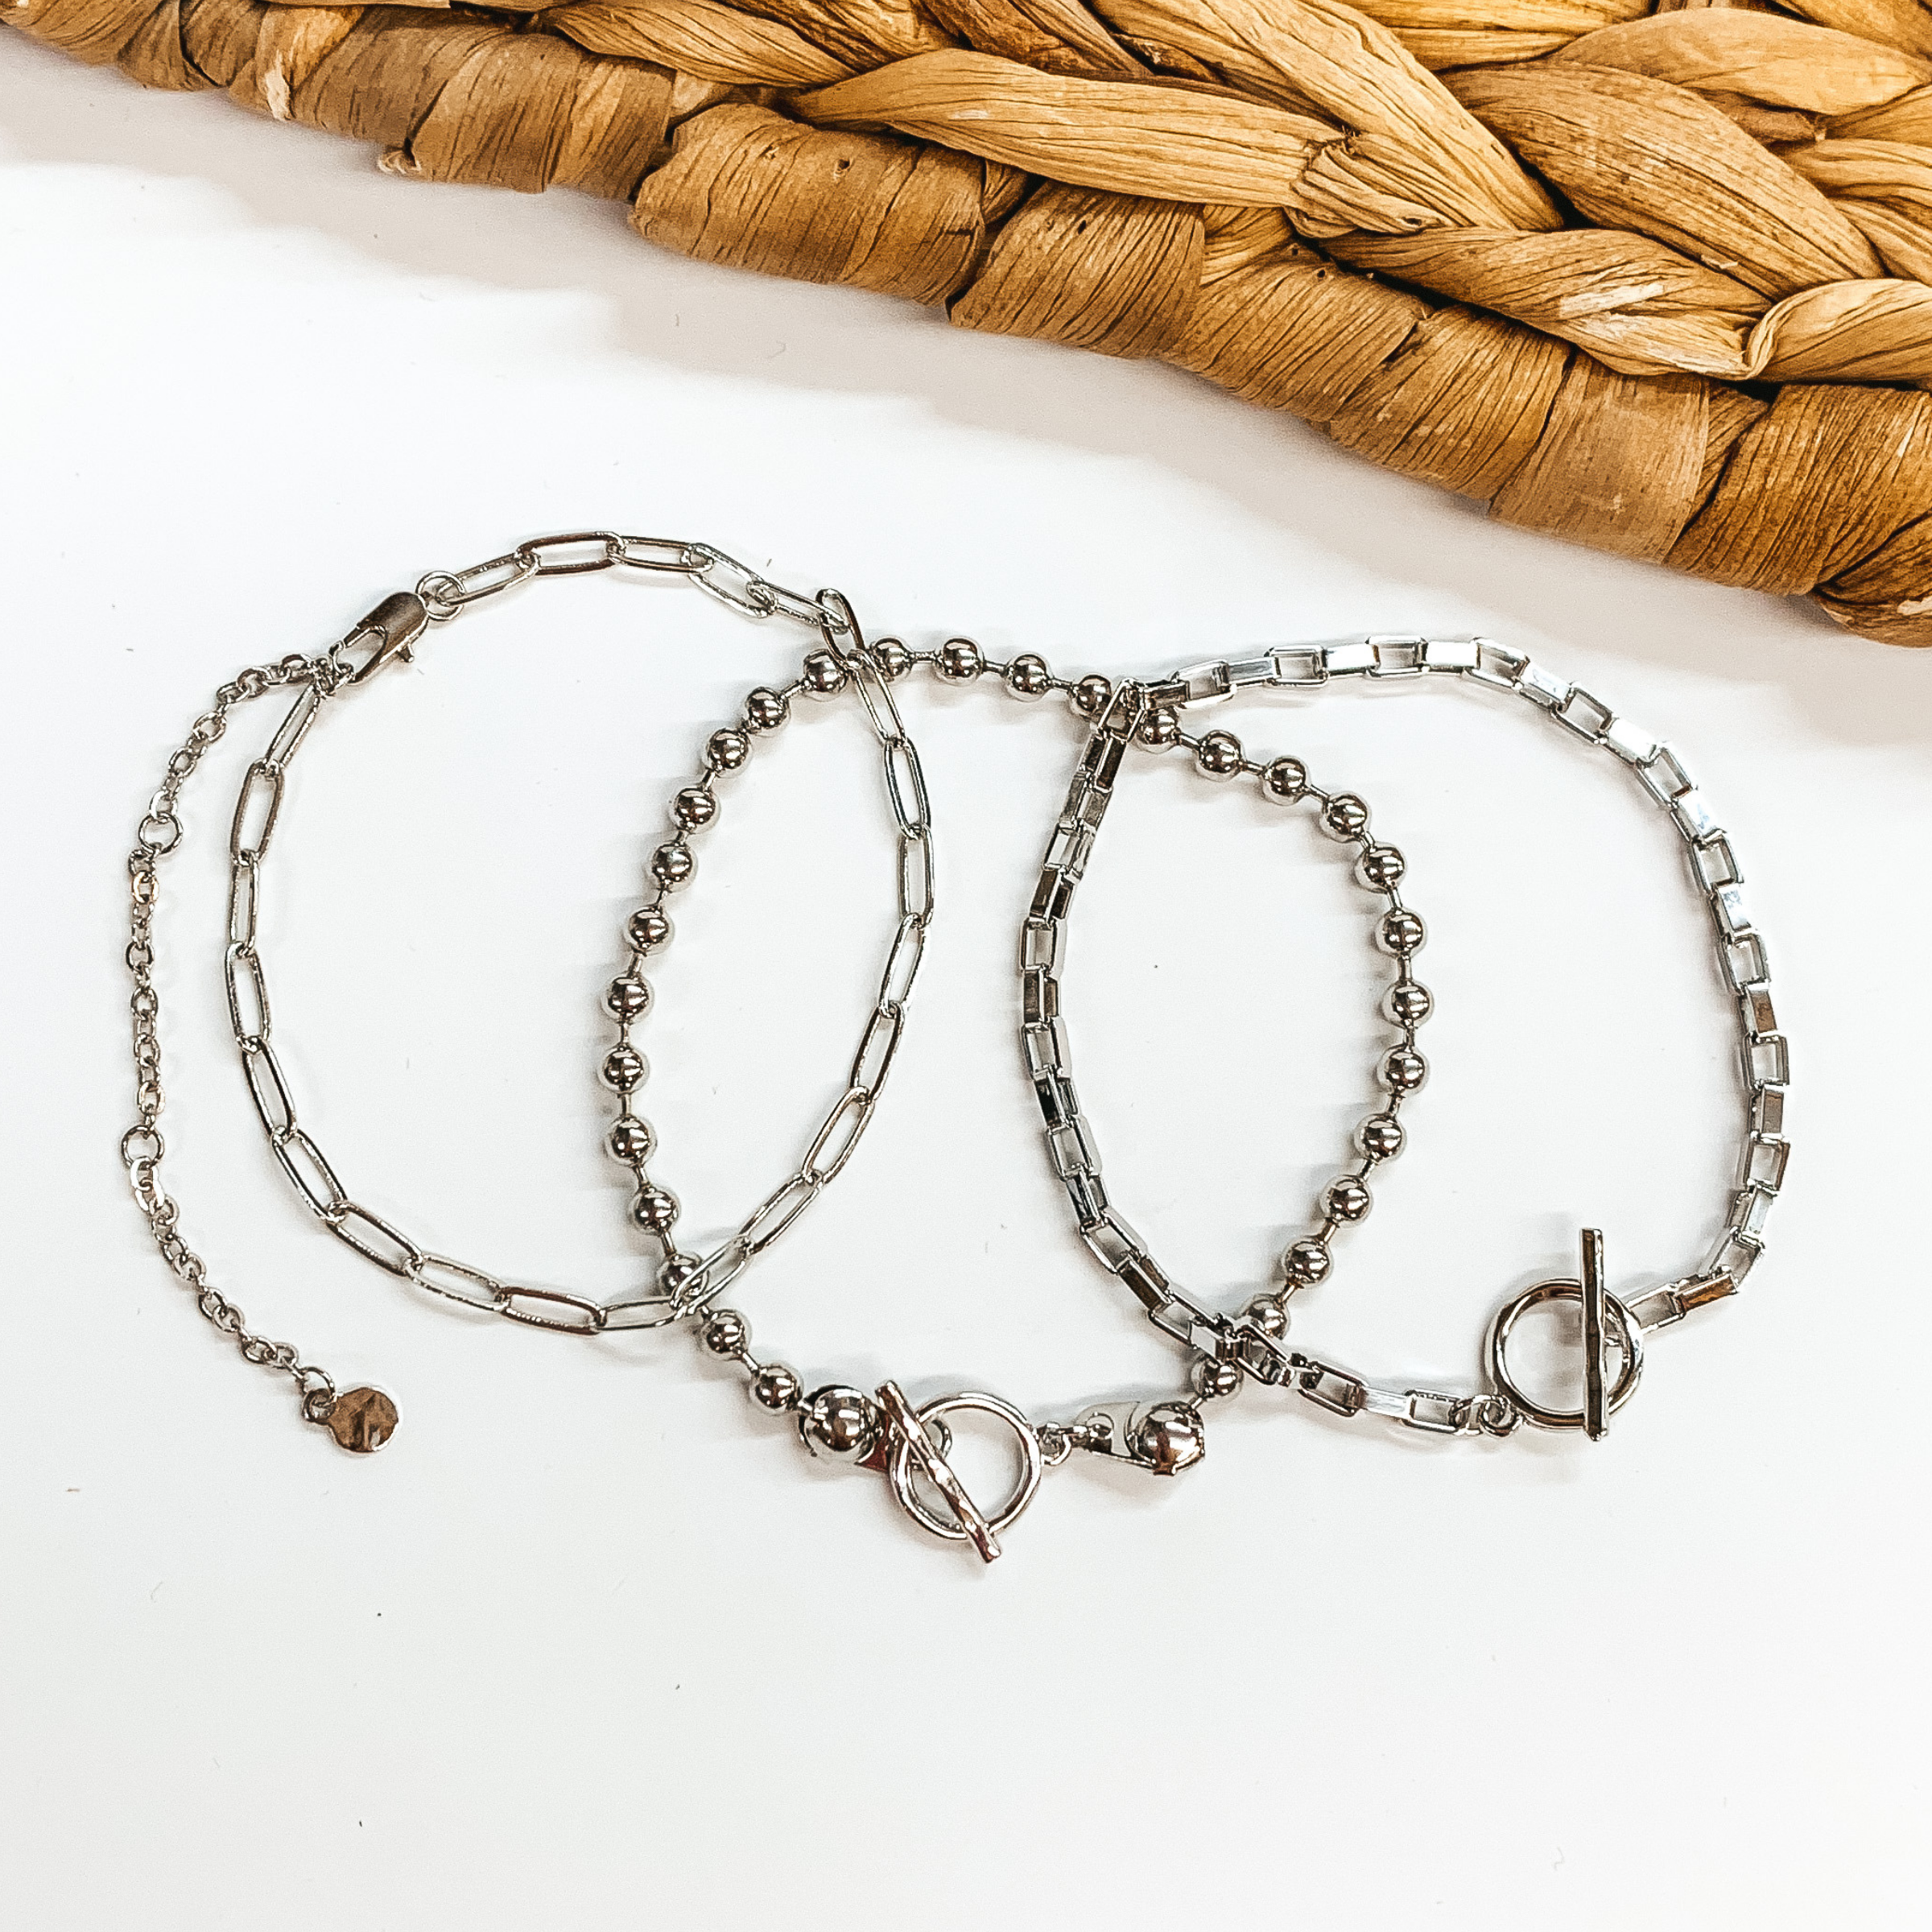 Set of Three | Chain and Beaded Bracelet Set in Silver Tone - Giddy Up Glamour Boutique